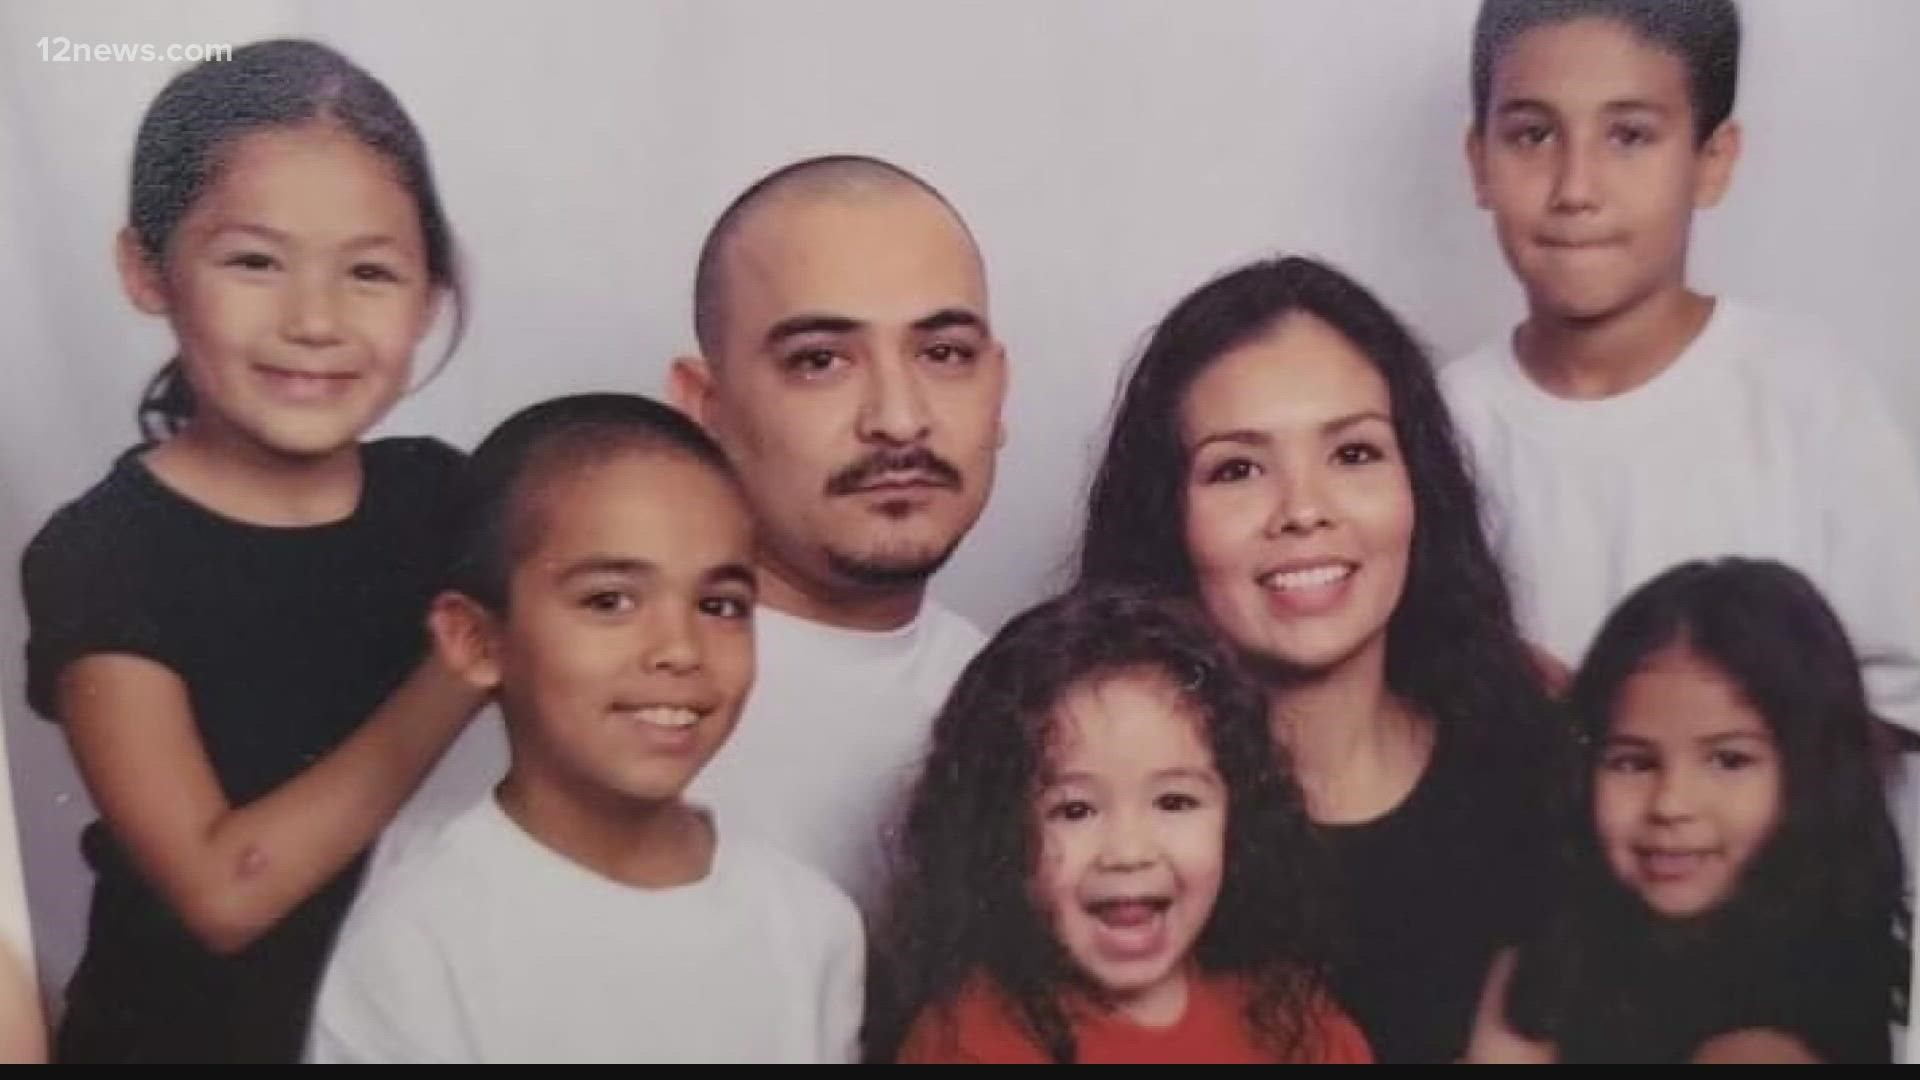 Leo Montenegro’s family wishes they could have had their chance to say goodbye. The father of five was killed early Sunday morning when he was hit by a car.